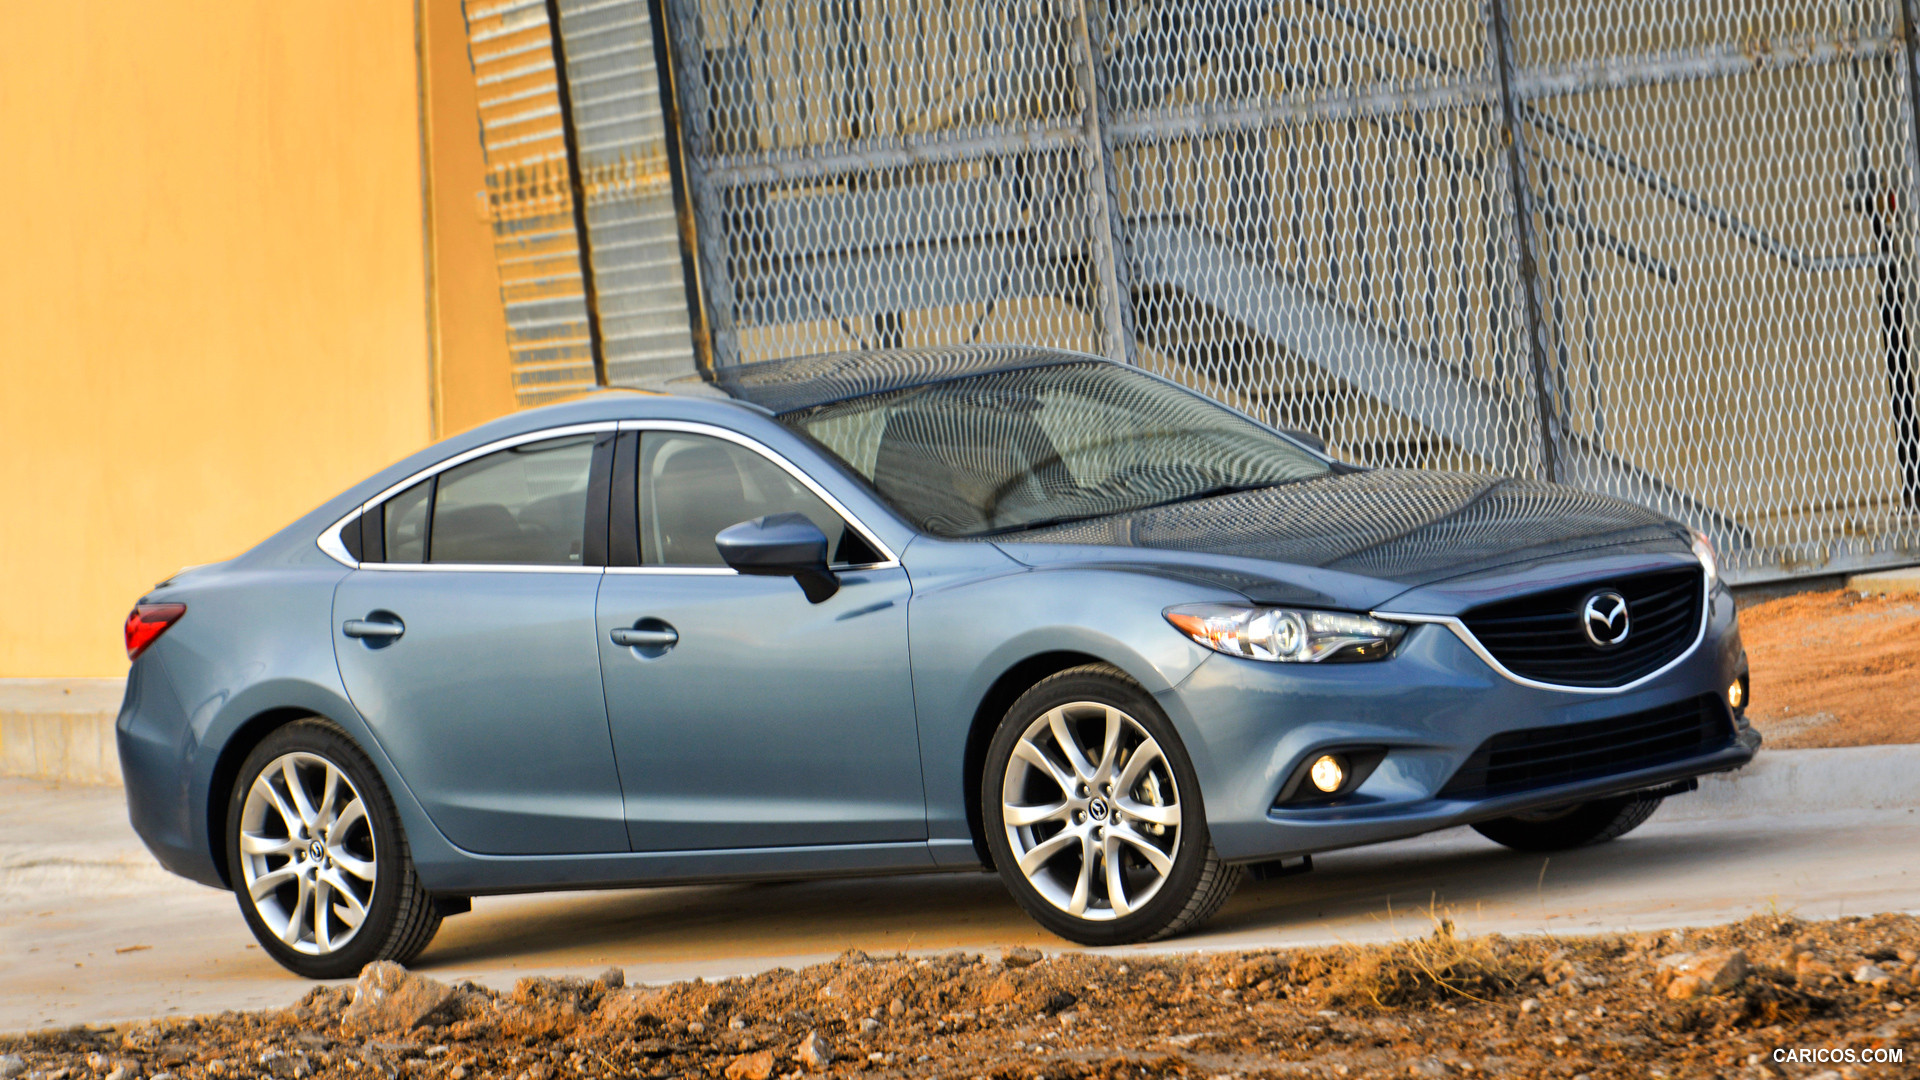 2014 Mazda6 GT - Front, #125 of 179